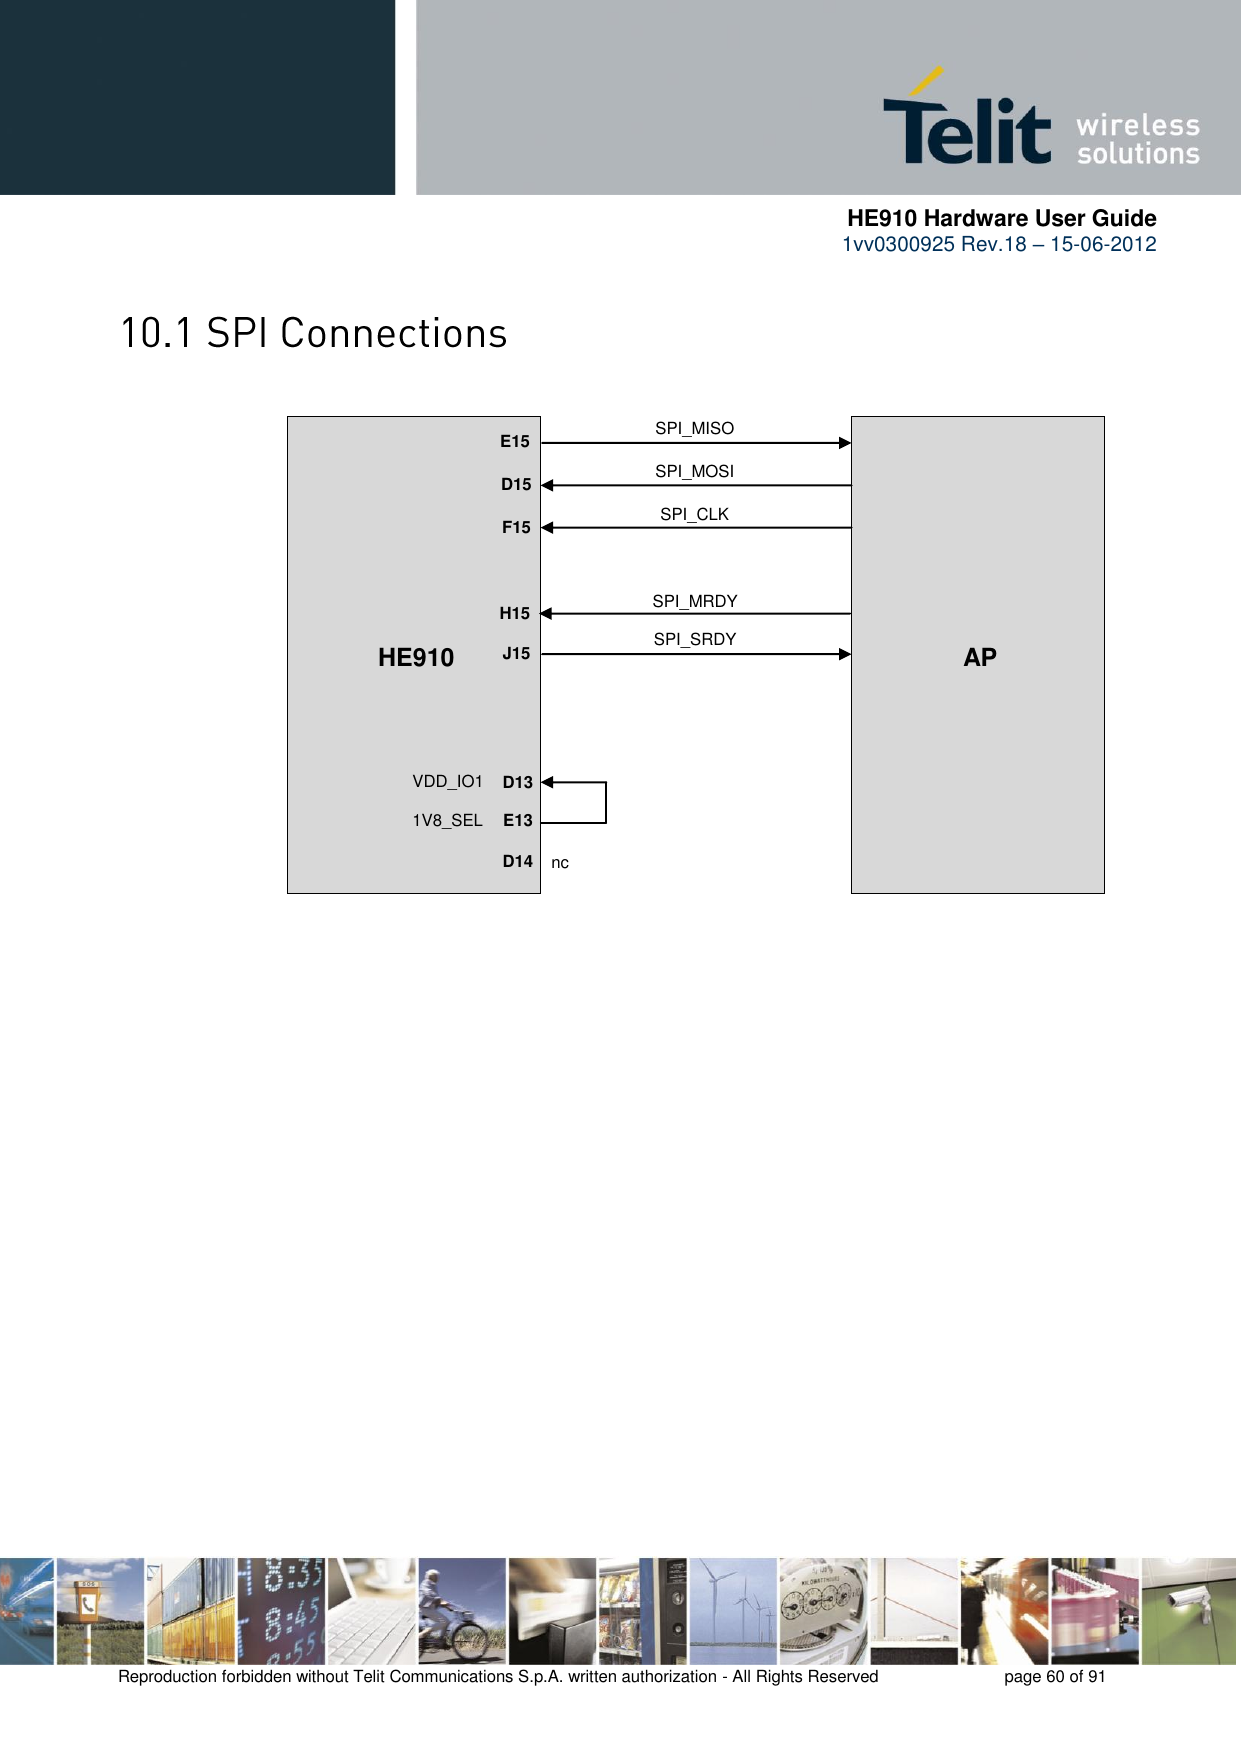      HE910 Hardware User Guide 1vv0300925 Rev.18 – 15-06-2012    Reproduction forbidden without Telit Communications S.p.A. written authorization - All Rights Reserved    page 60 of 91   SPI_MISO E15 D15 F15  H15 J15   D13 E13 D14 HE910            AP SPI_MOSI SPI_CLK SPI_MRDY SPI_SRDY VDD_IO1 1V8_SEL  nc  